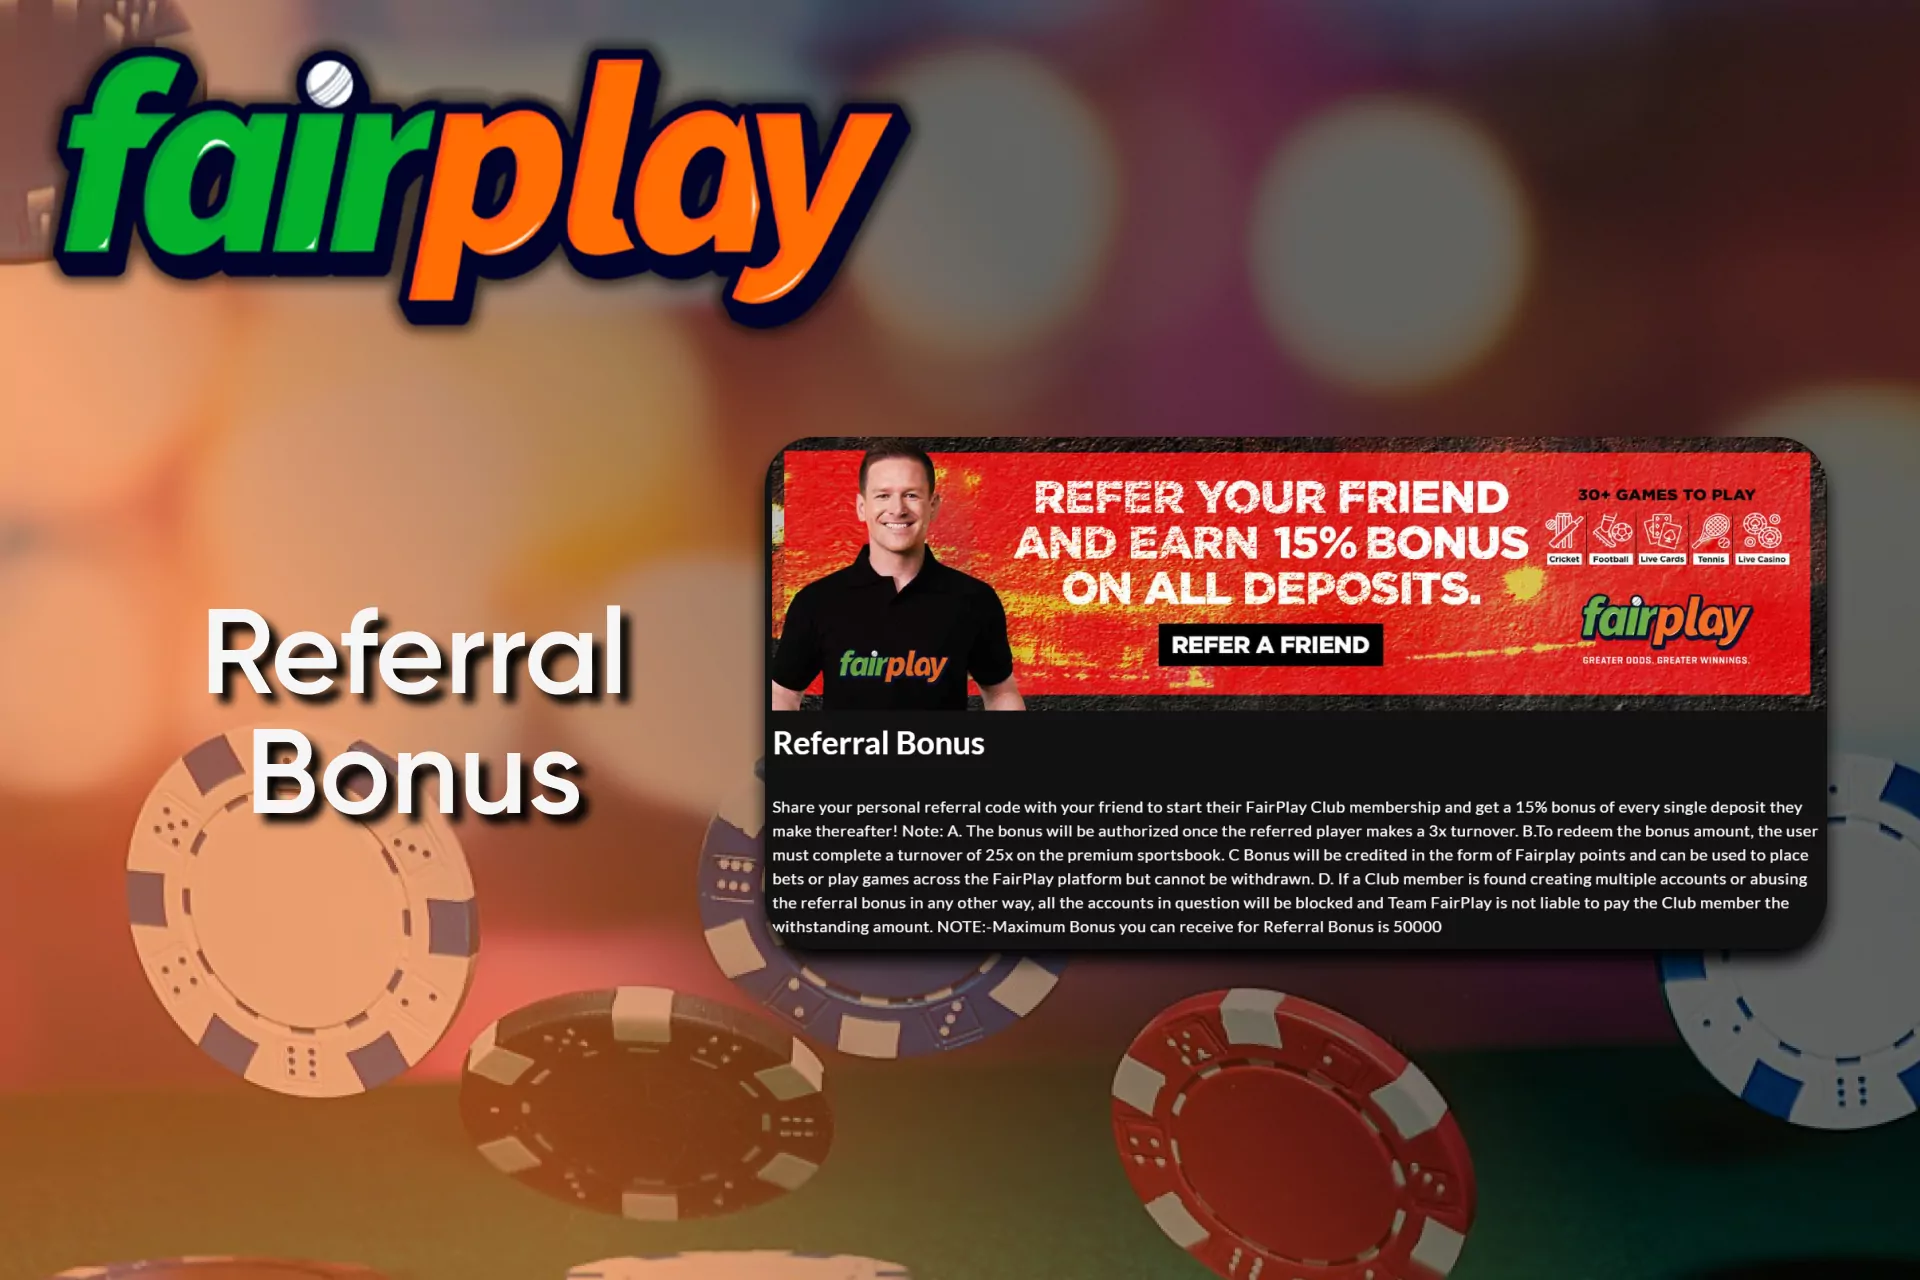 Join the referral program to increase your profit and give a bonus to your friend.